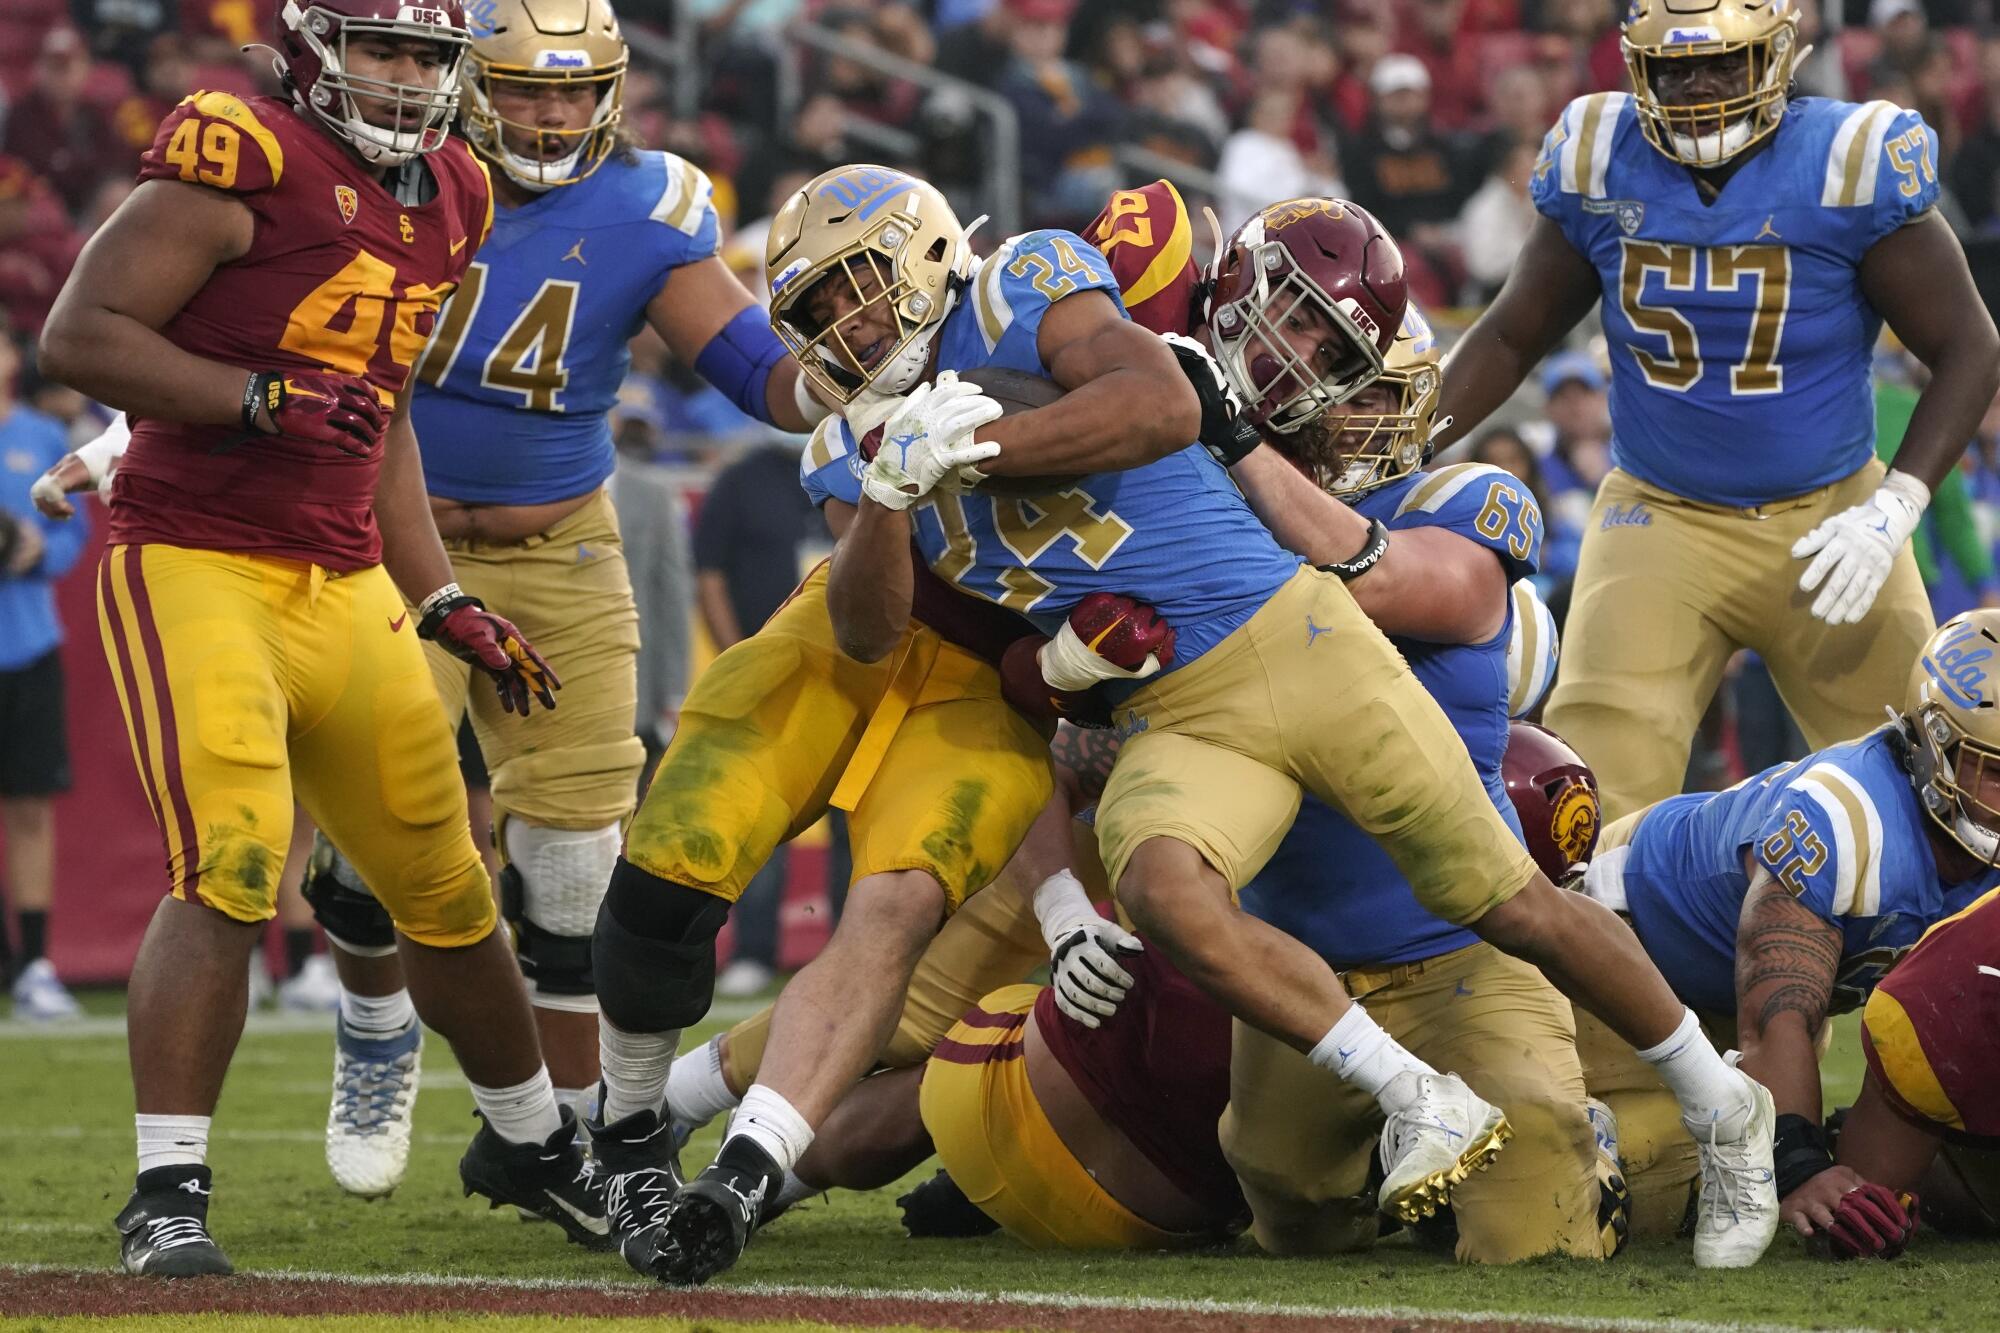 UCLA's Zach Charbonnet carries the ball under pressure from USC players during the 2021 season.